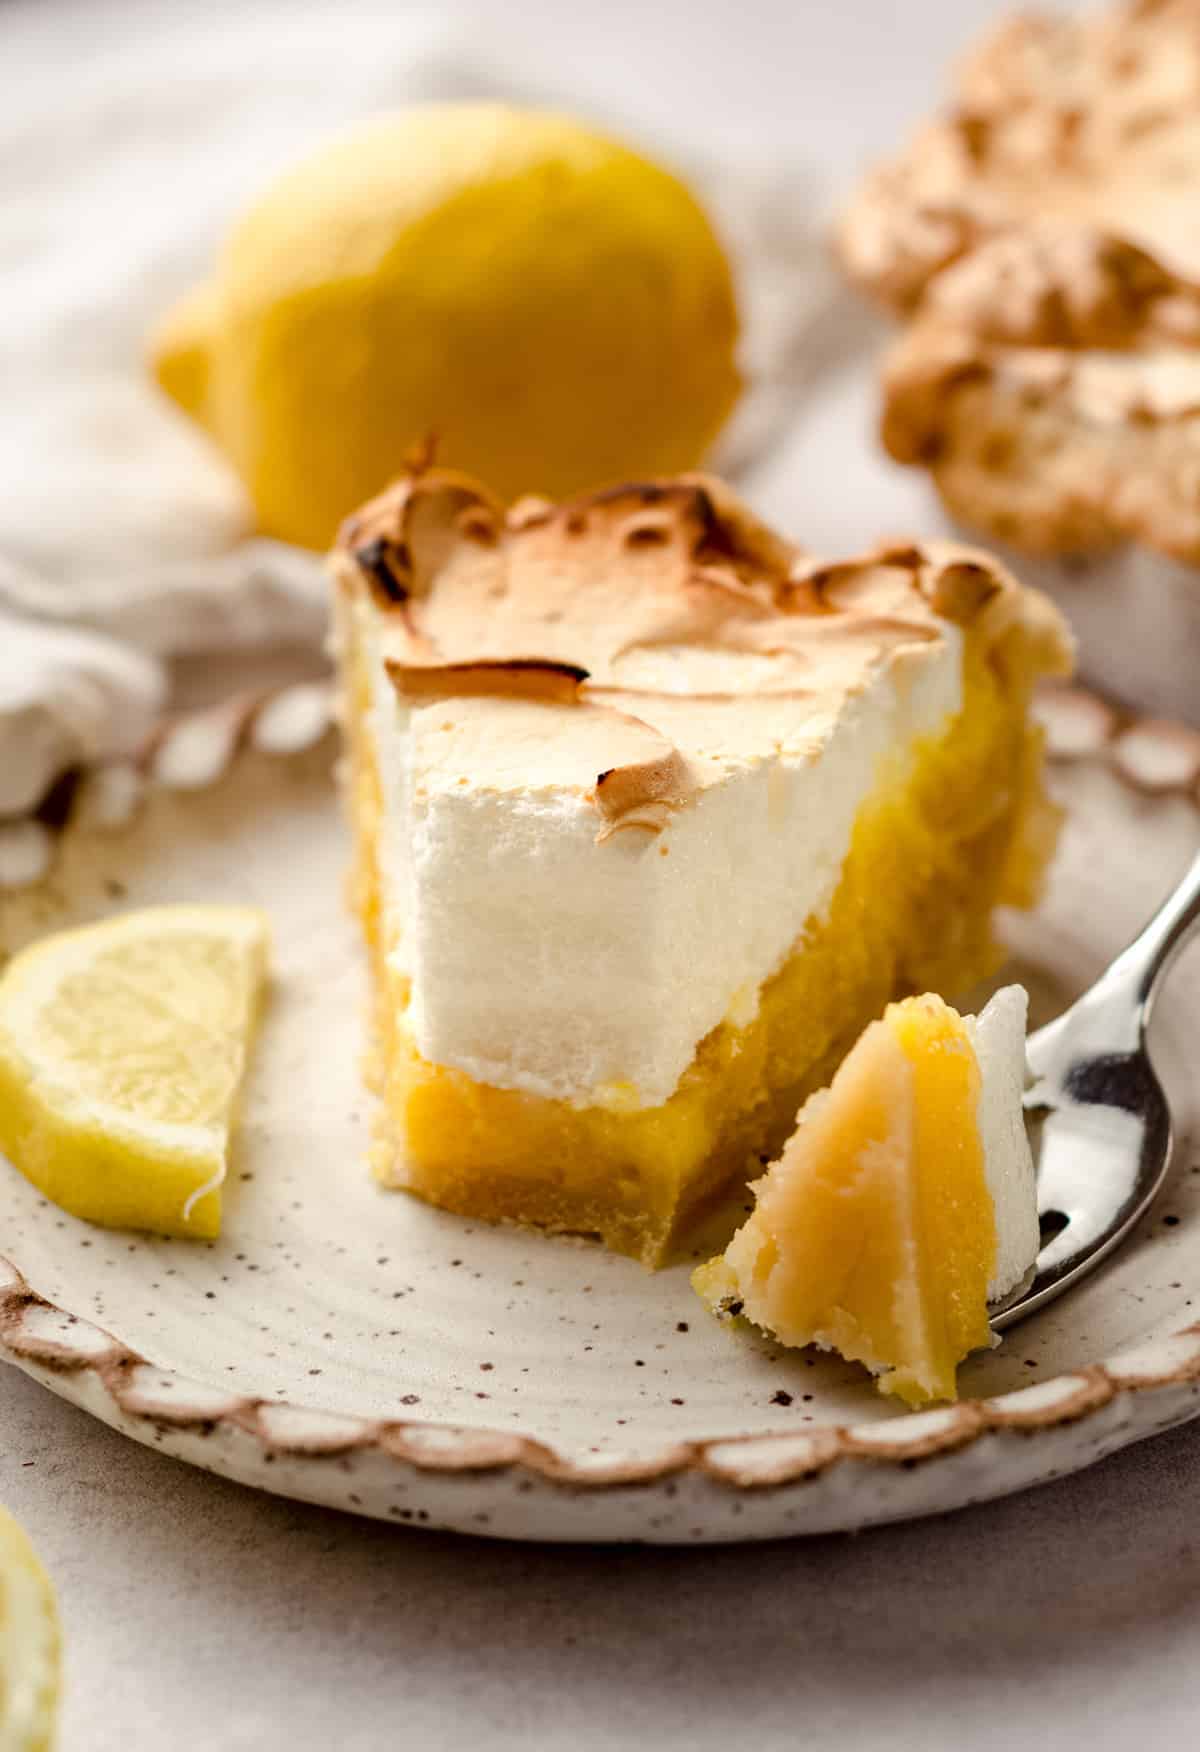 A slice of lemon meringue pie on a plate, with lemons in the background.